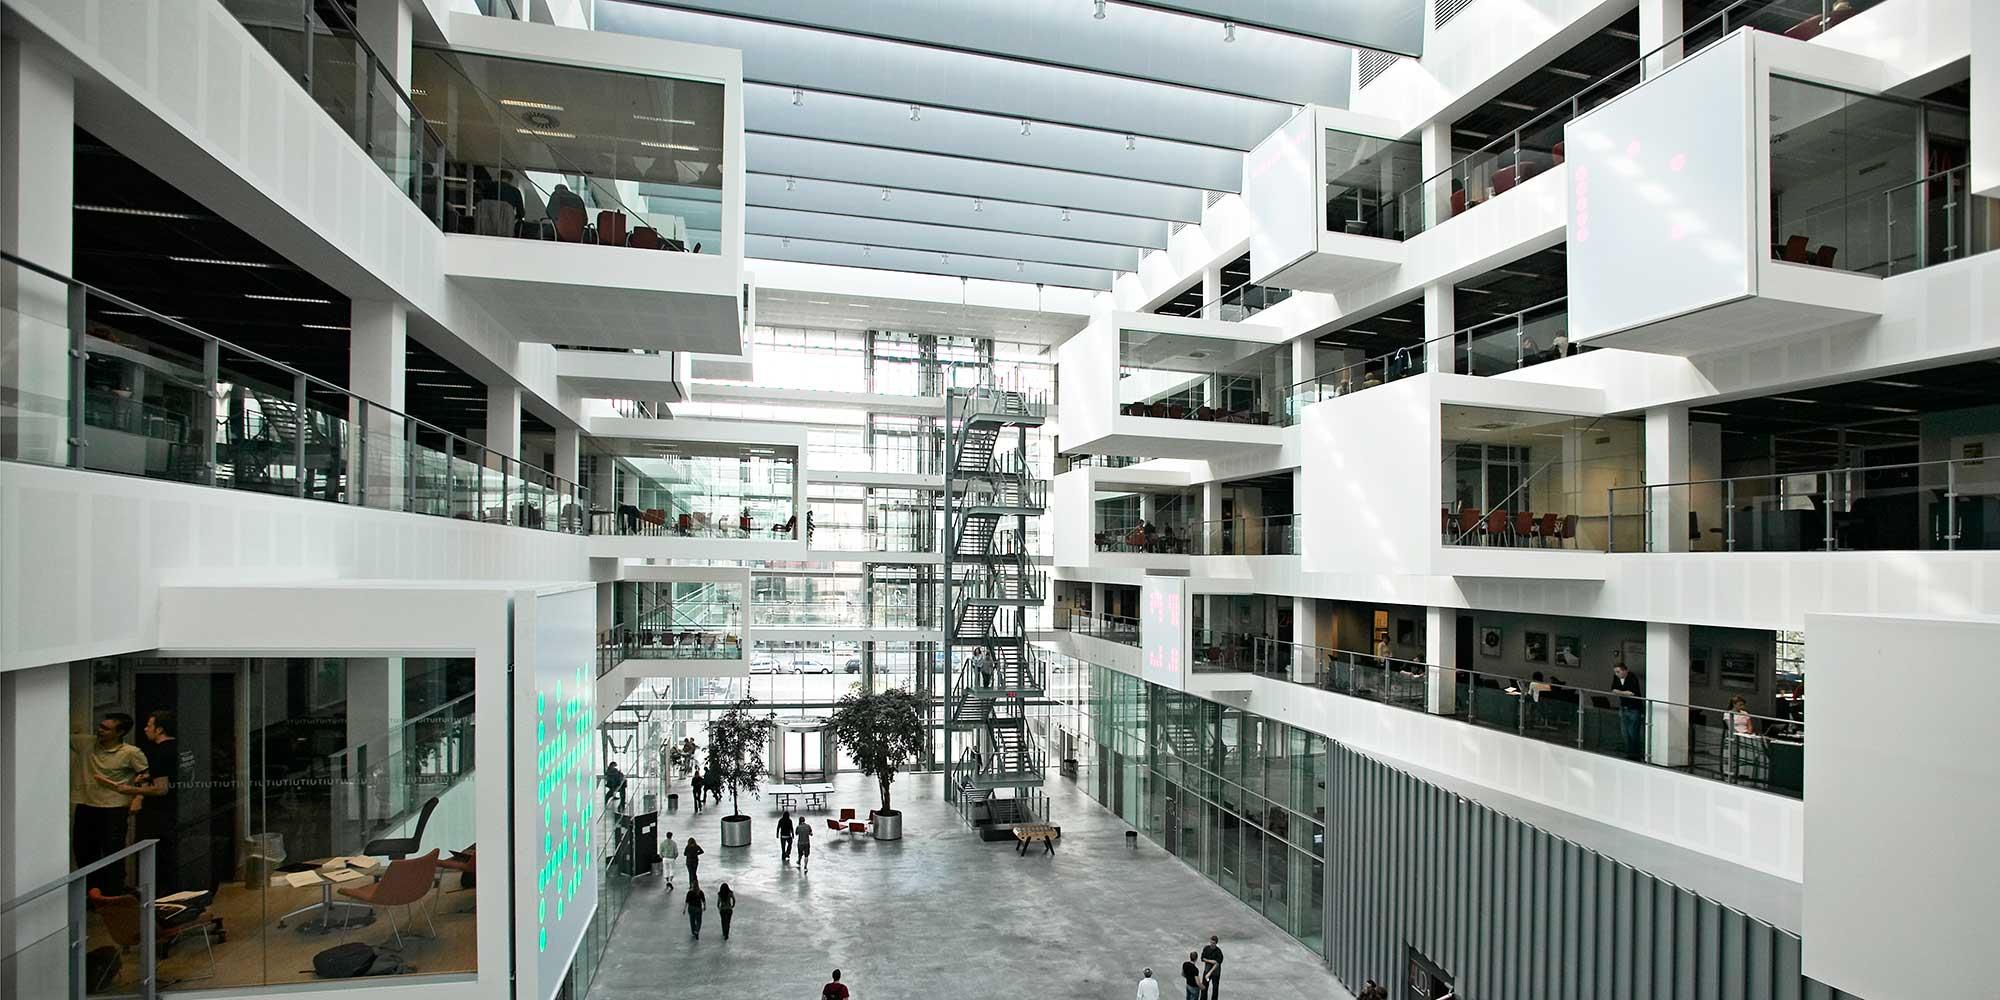 Grand view of ITU atrium and skyboxes by day